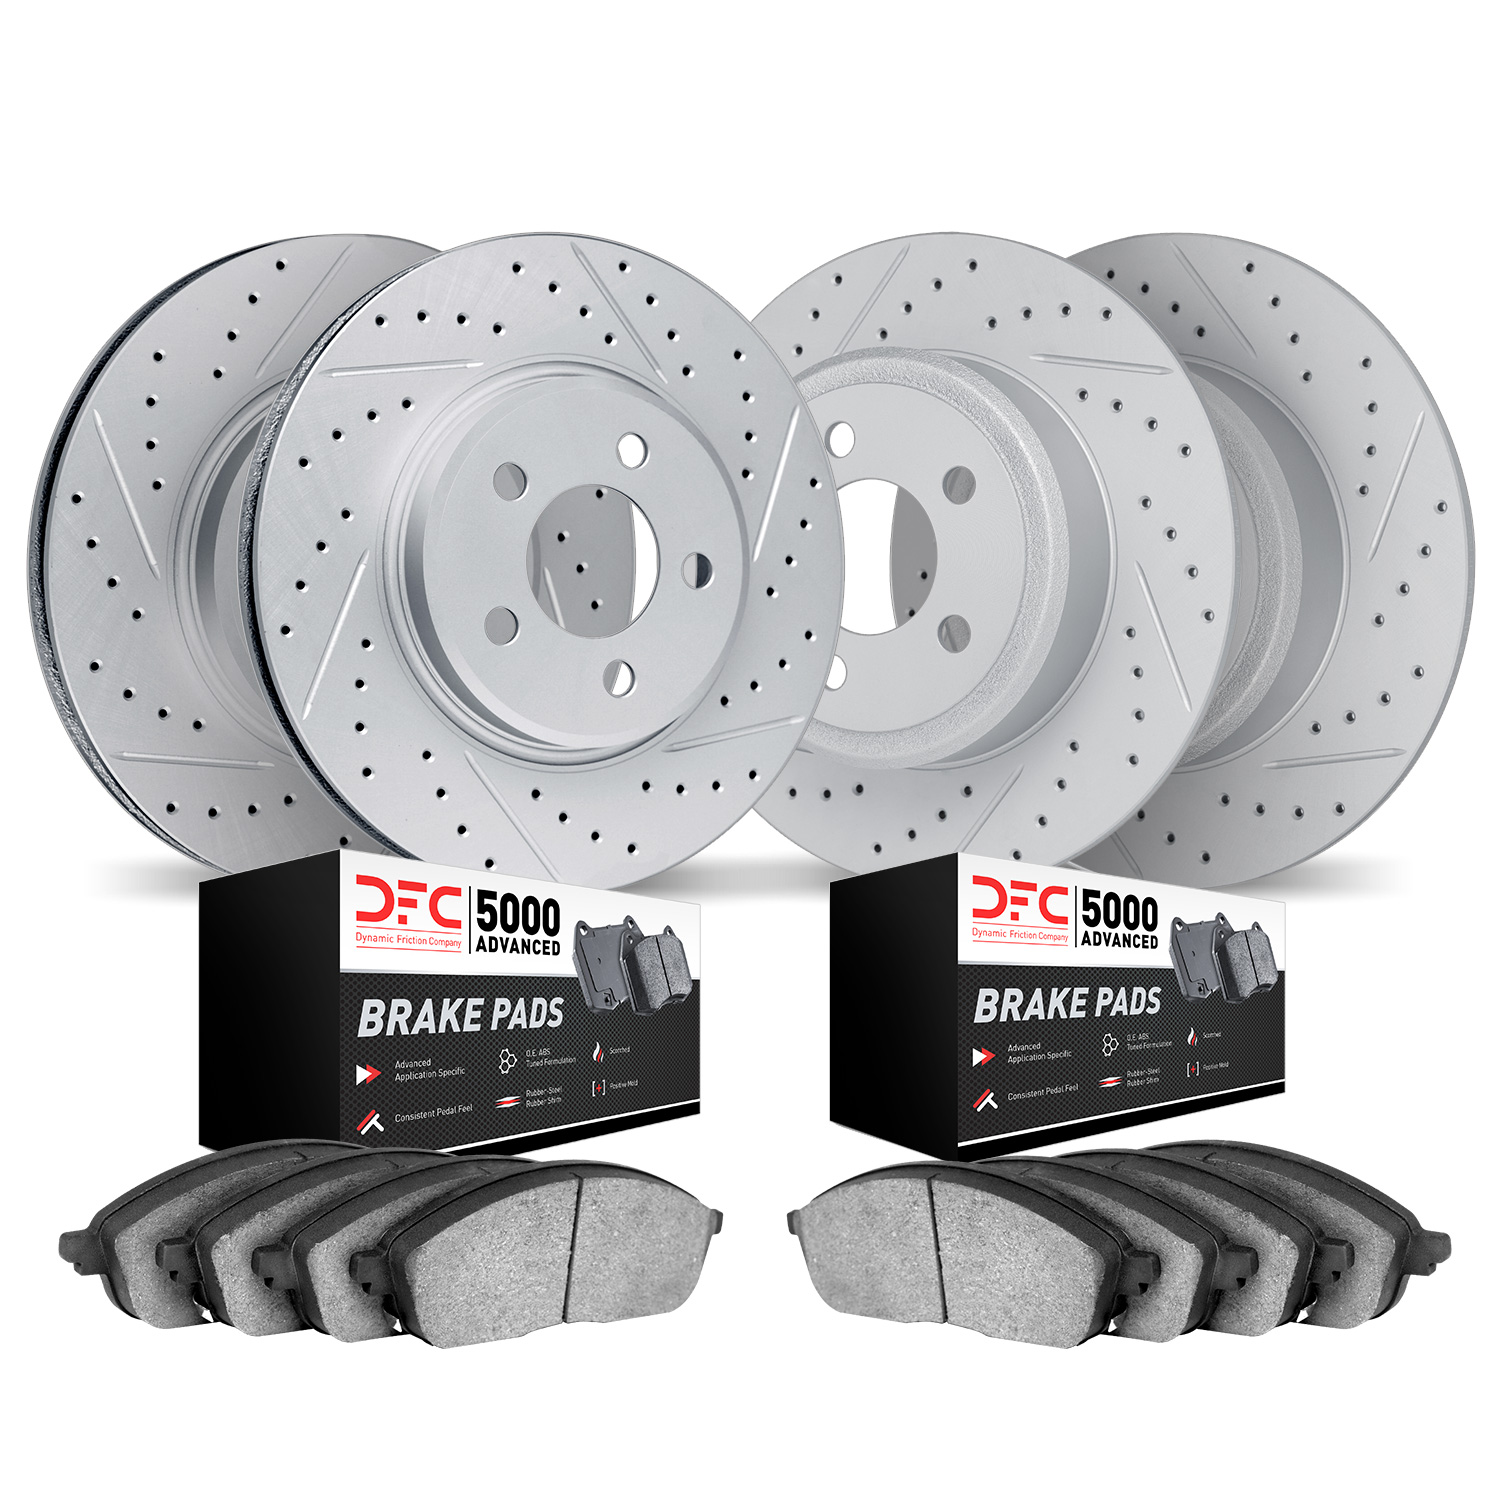 2504-52006 Geoperformance Drilled/Slotted Rotors w/5000 Advanced Brake Pads Kit, 2005-2005 GM, Position: Front and Rear